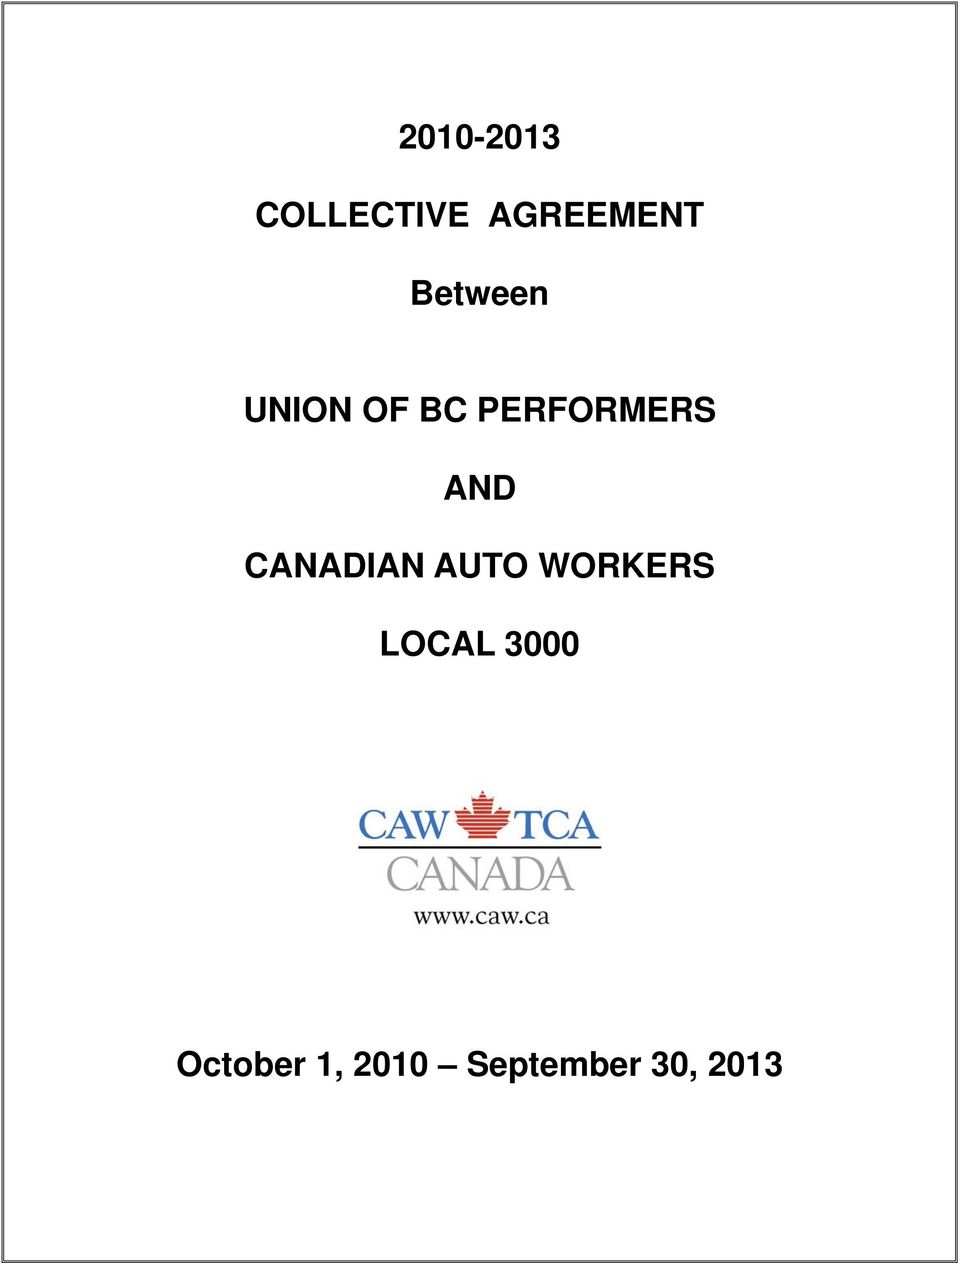 AND CANADIAN AUTO WORKERS LOCAL